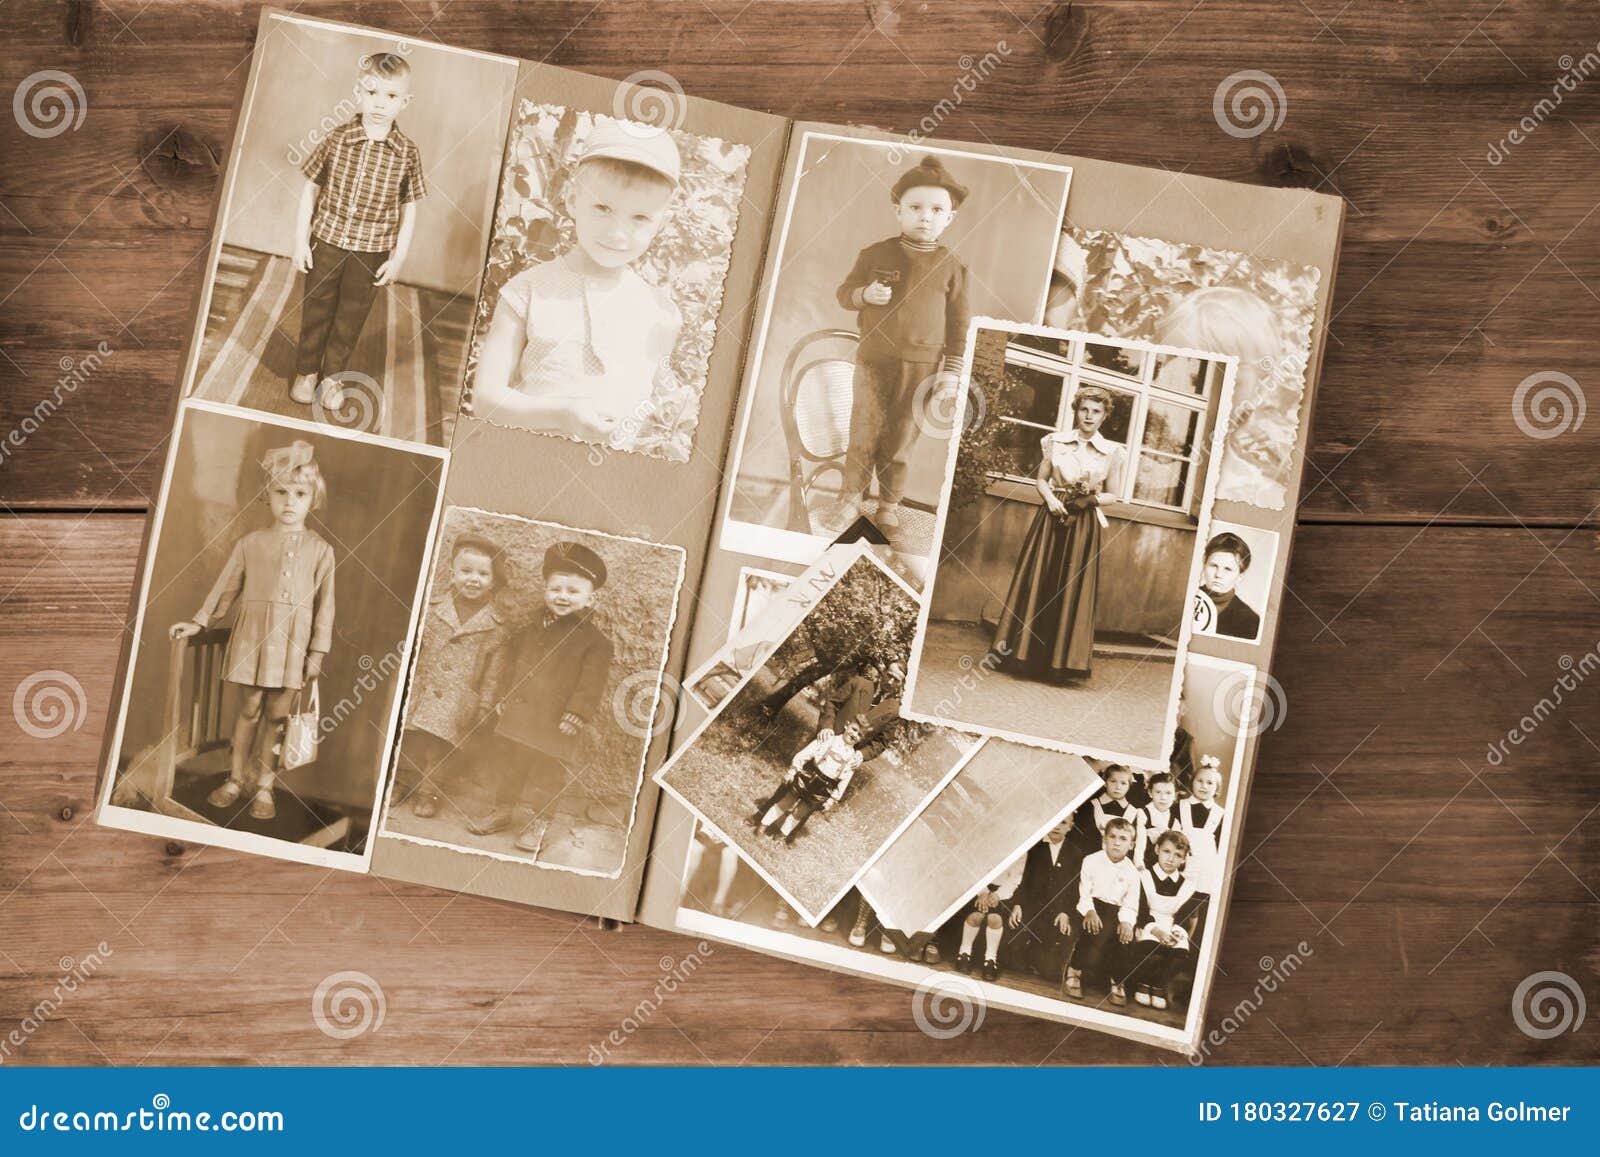 old retro album with vintage monochrome photographs in sepia color, the concept of genealogy, the memory of ancestors, family ties